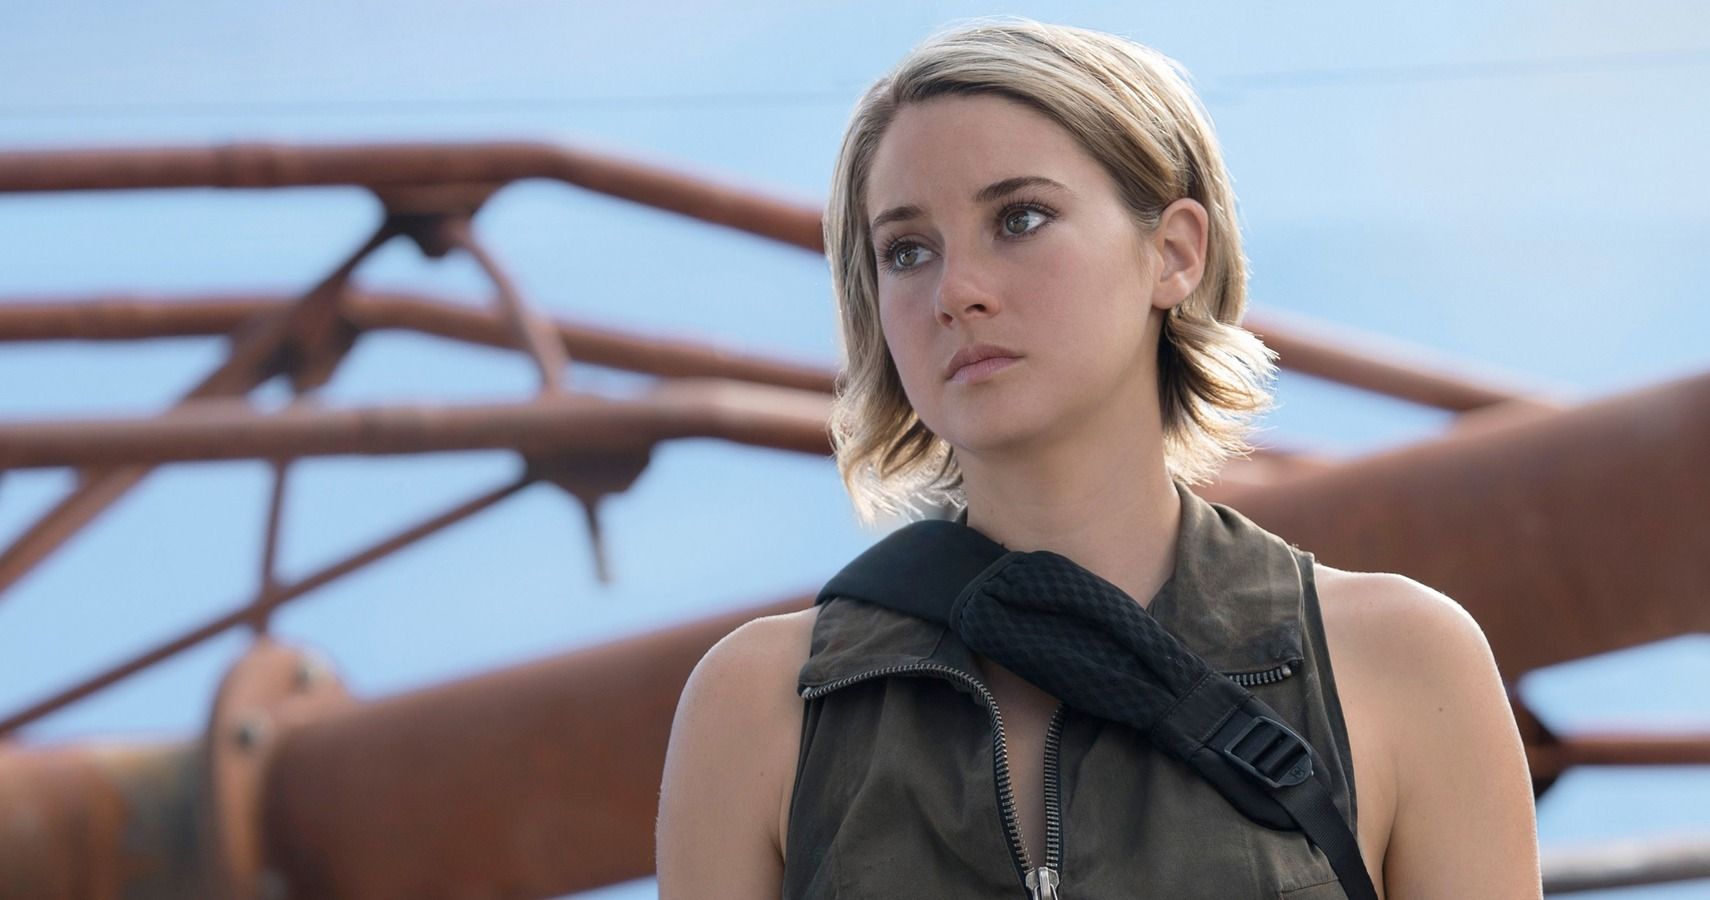 Shailene Woodleys 10 Best Movies According To Rotten Tomatoes 